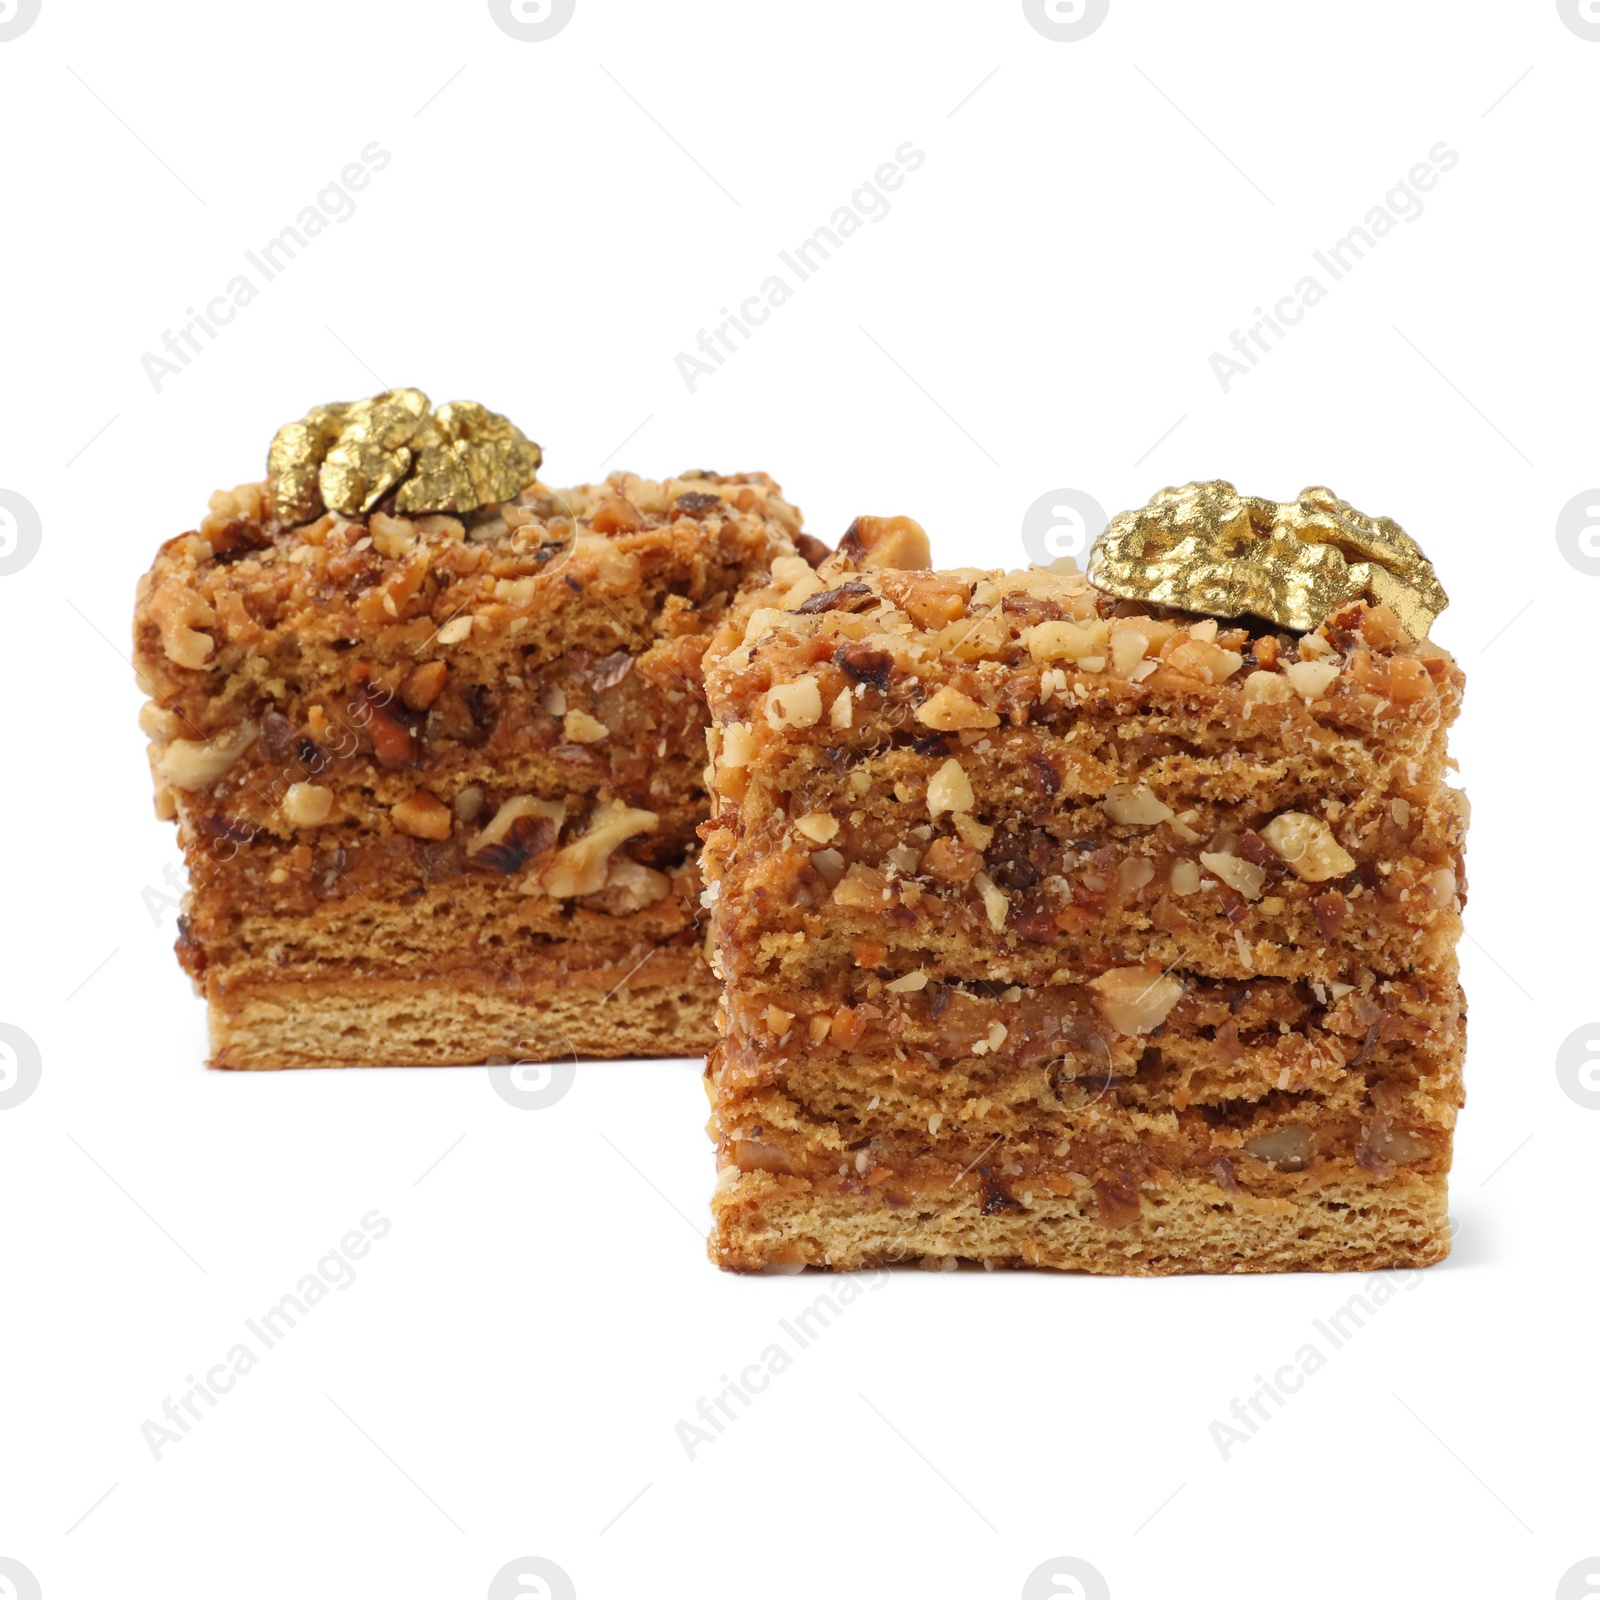 Photo of Pieces of layered honey cake with walnuts on white background